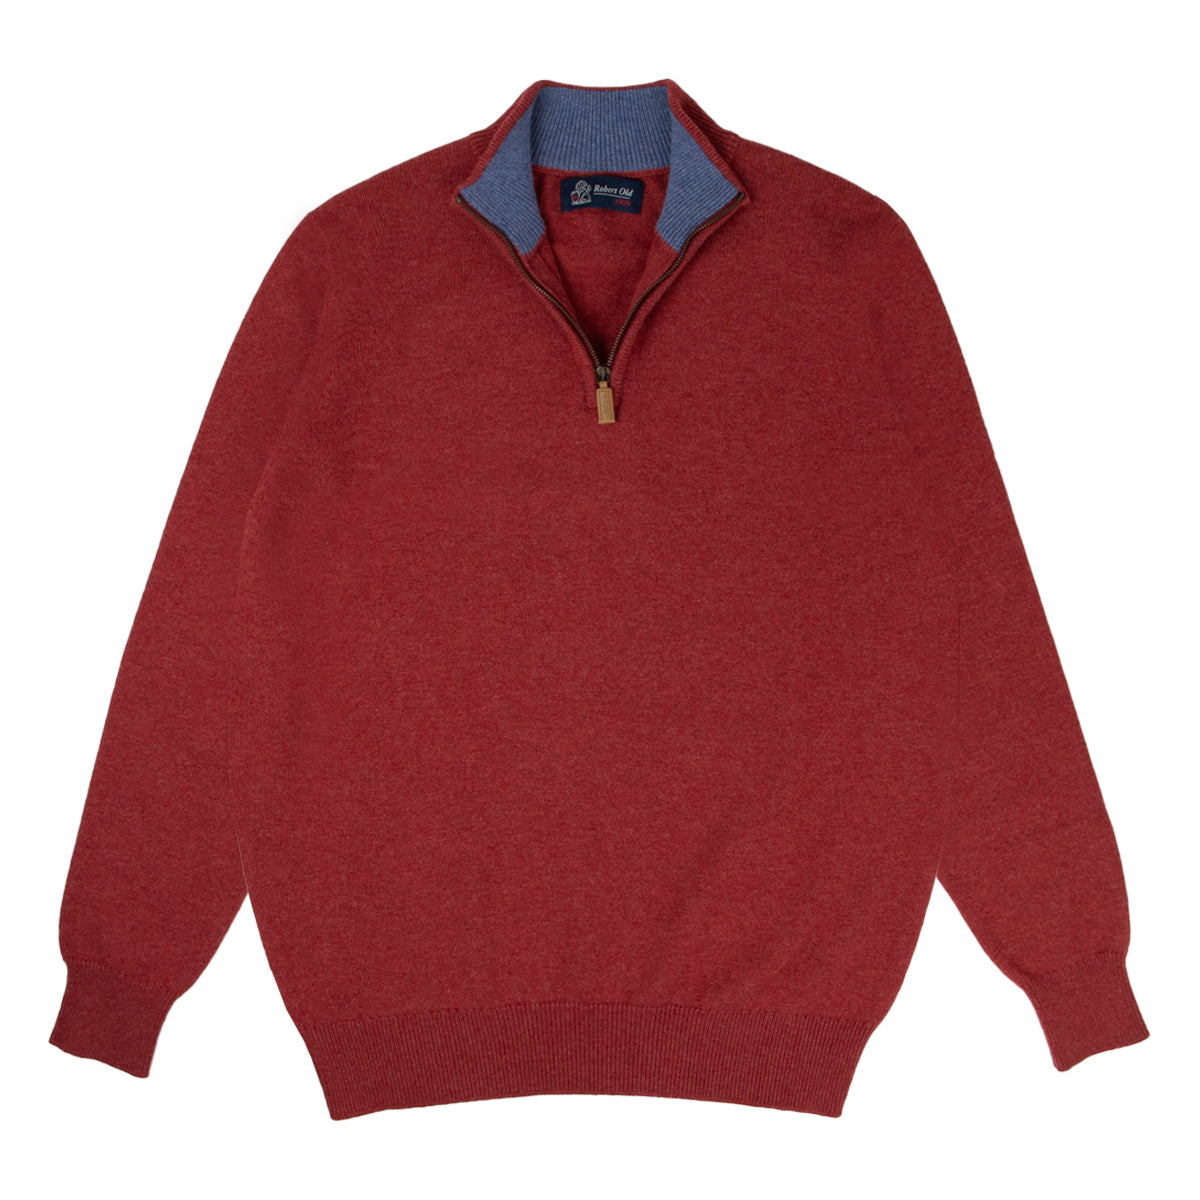 The Bowmore 1/4 Zip Neck Cashmere Sweater - Poppy / Lapis  Robert Old   